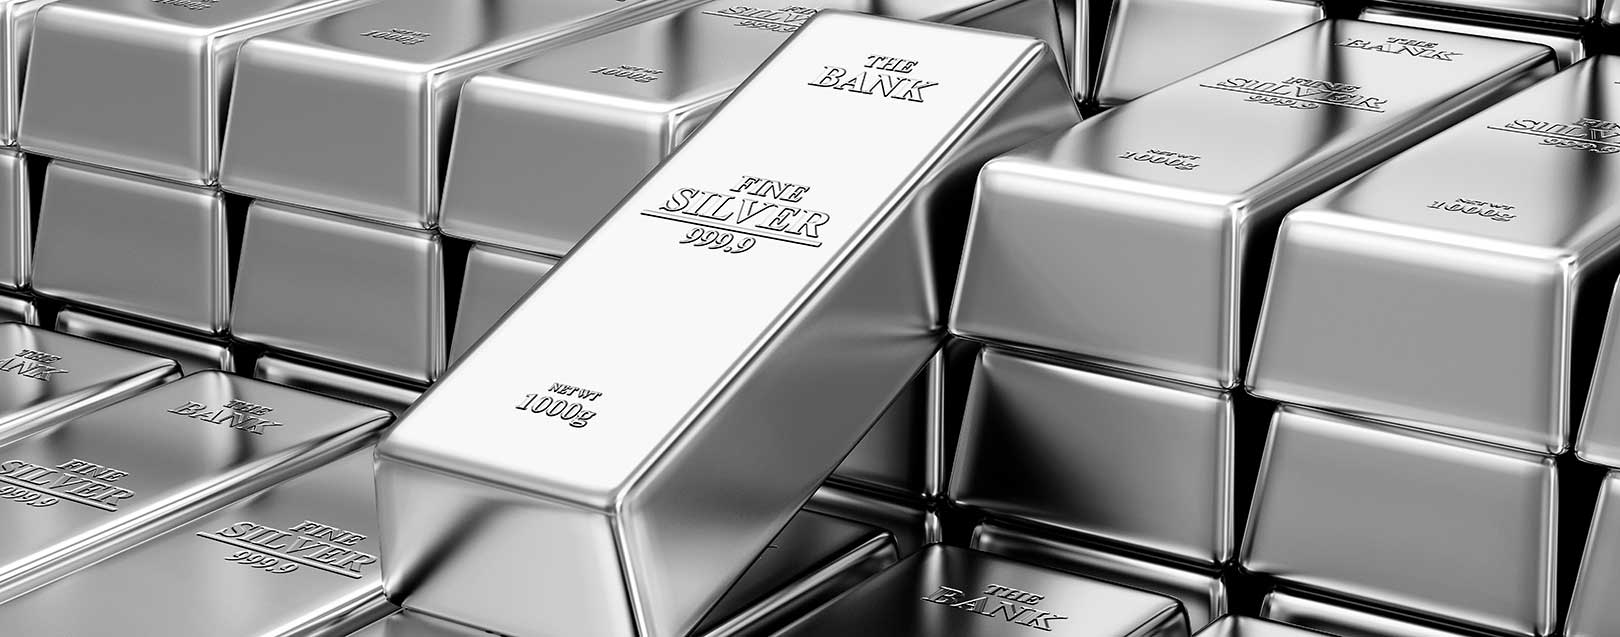 Silver bar demand drops due to demonetisation, high prices